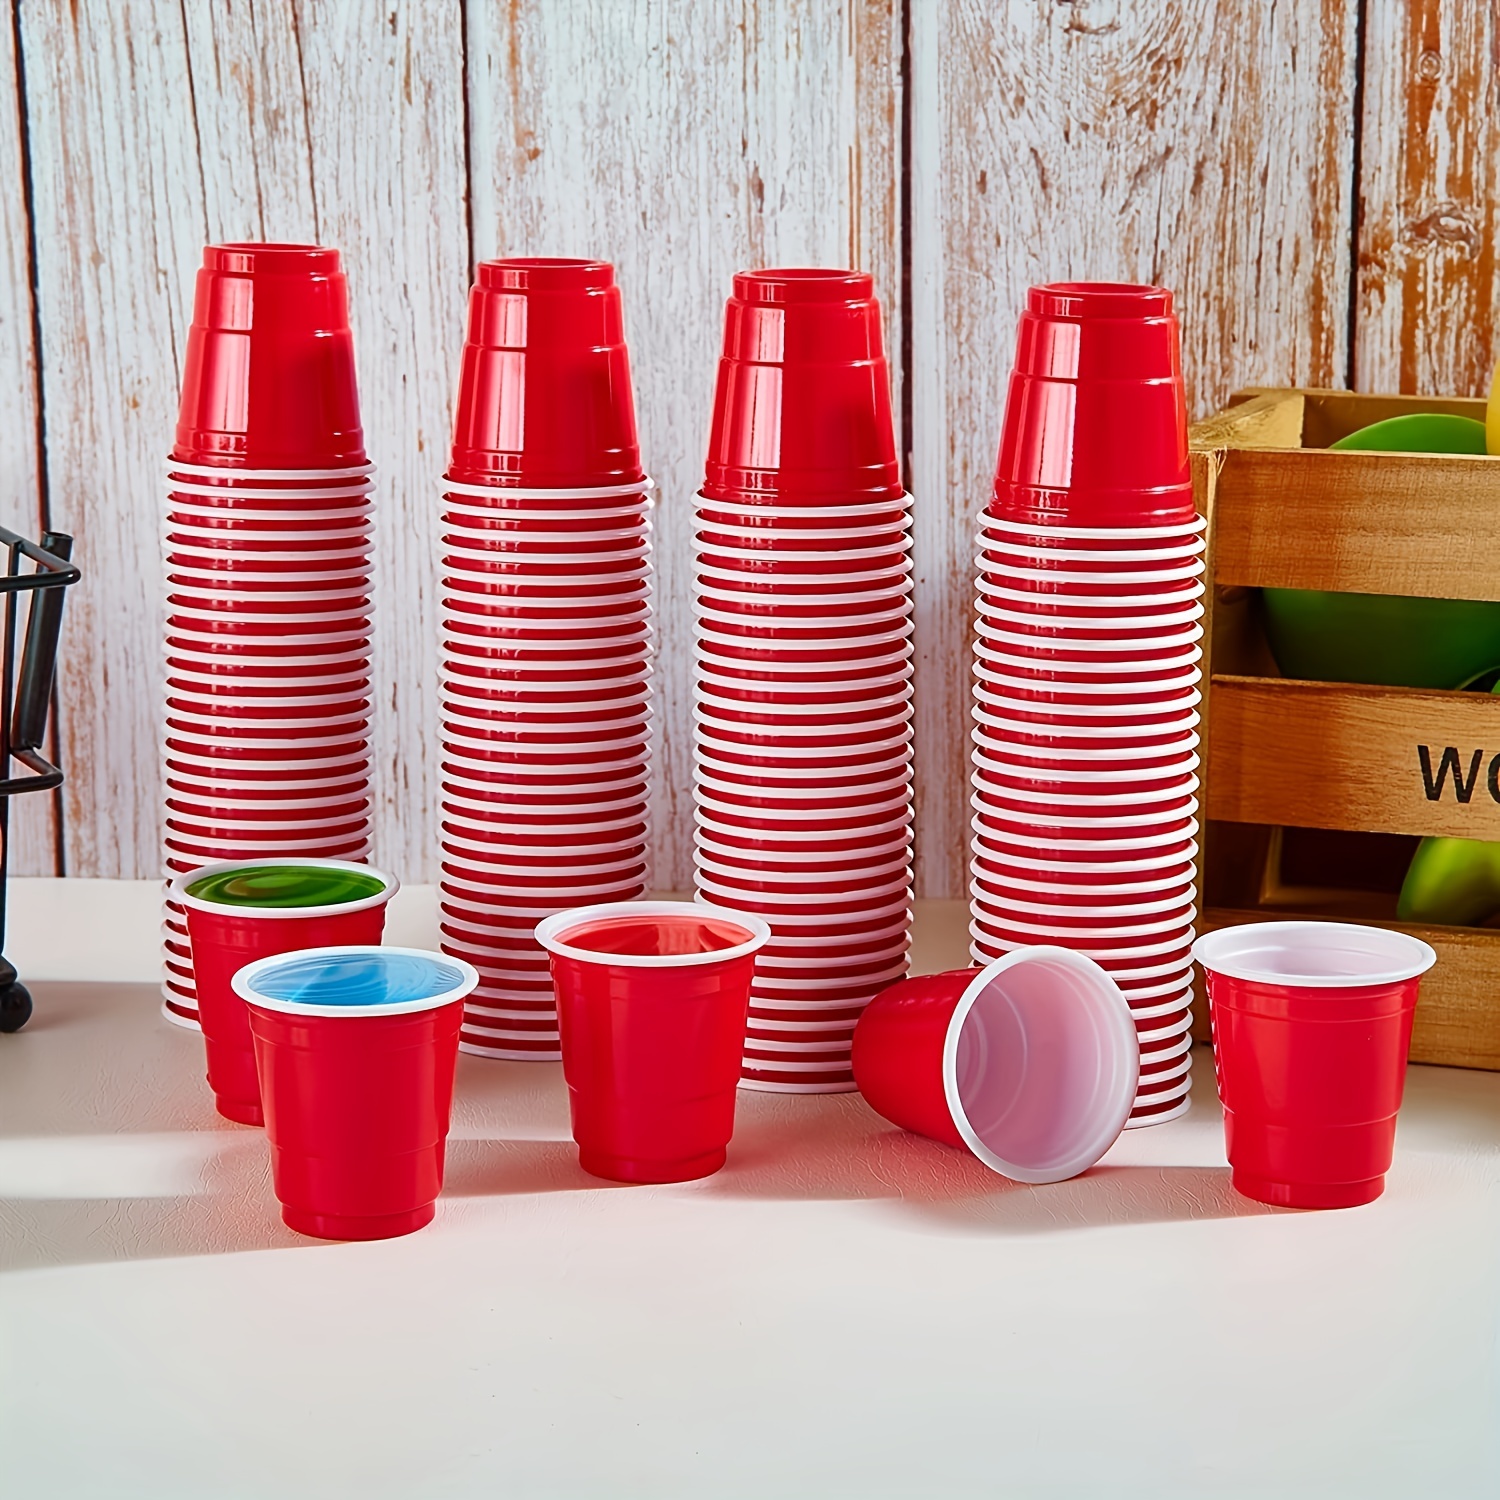 100pcs / Set Of 450ml Red Disposable Plastic Cup Party Cup Bar